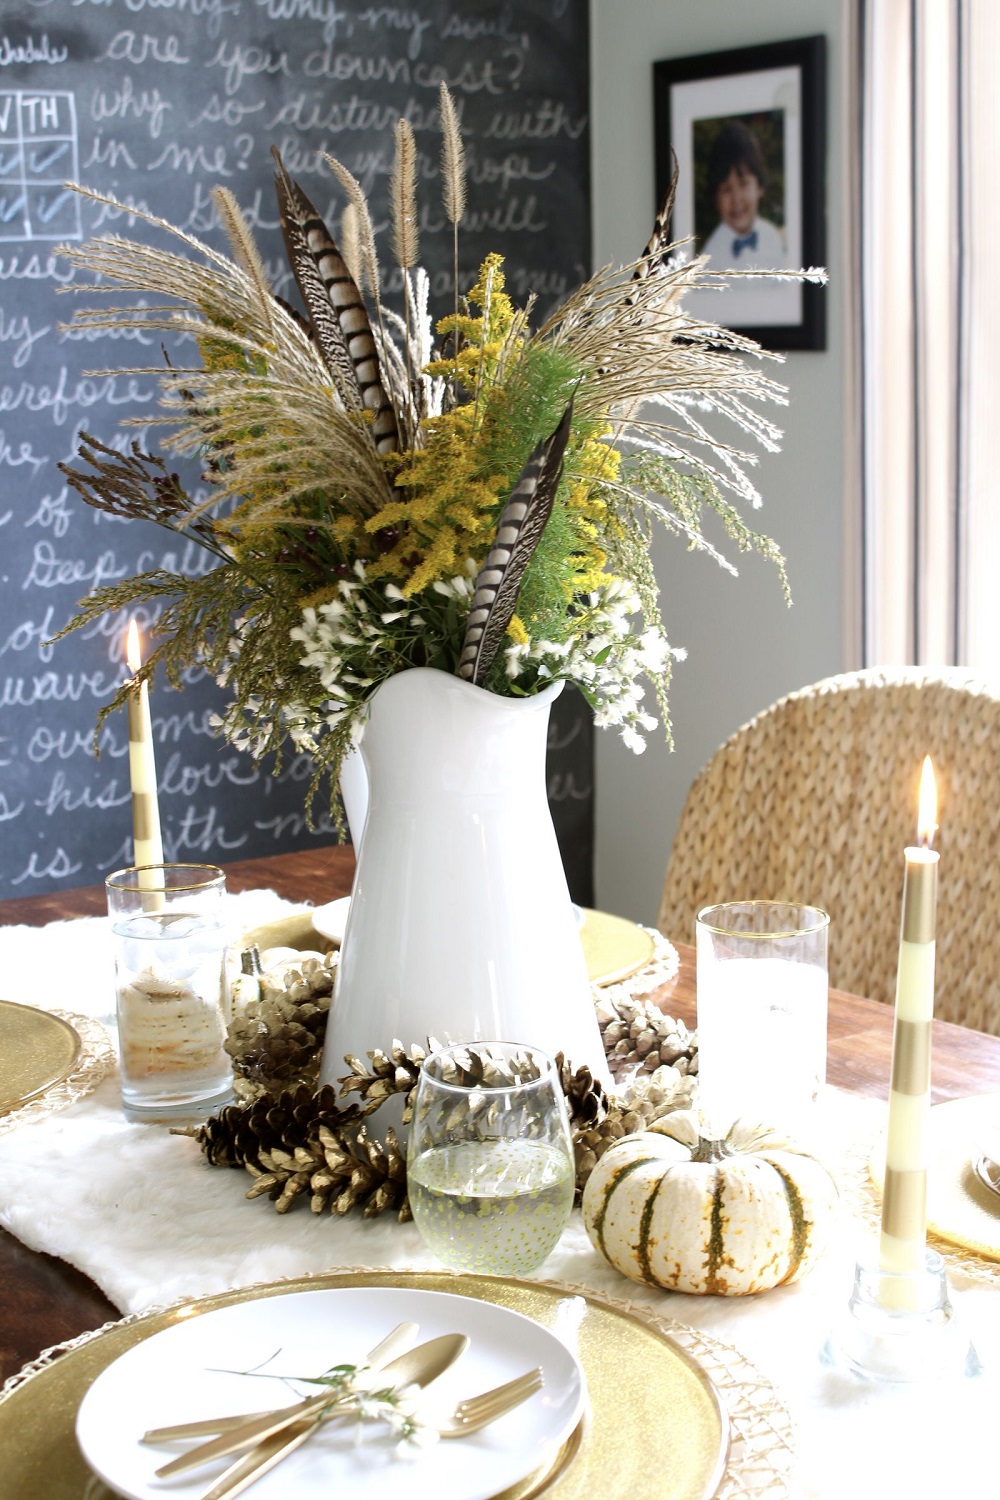 t3-68 Thanksgiving decorating ideas that will make your home look great